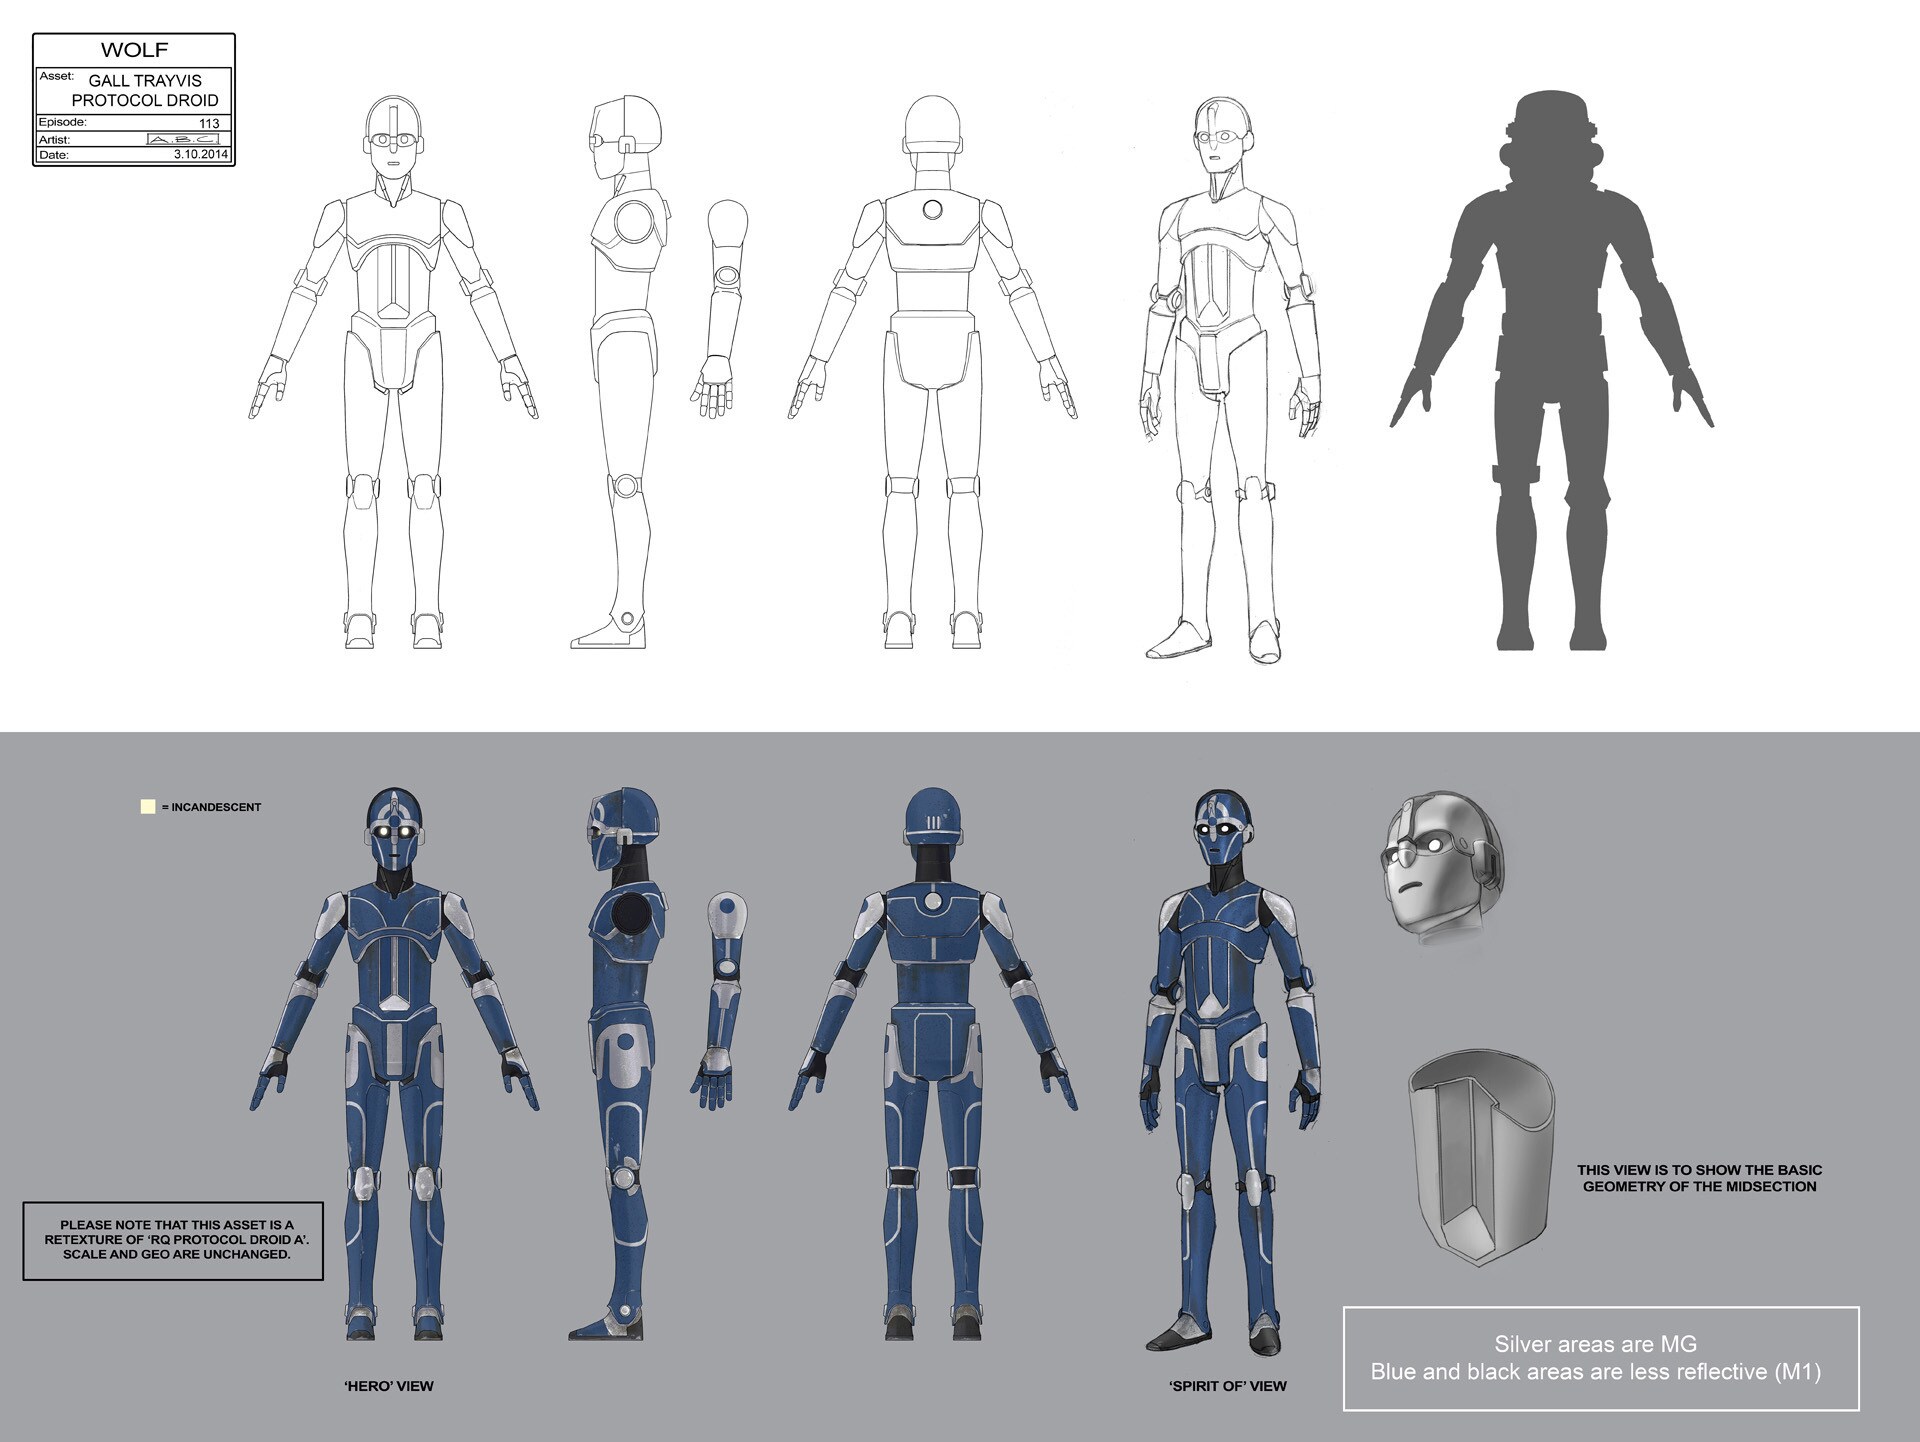 Gall Trayvis’ droids use the McQuarrie-inspired protocol droid design finished with Senate colori...